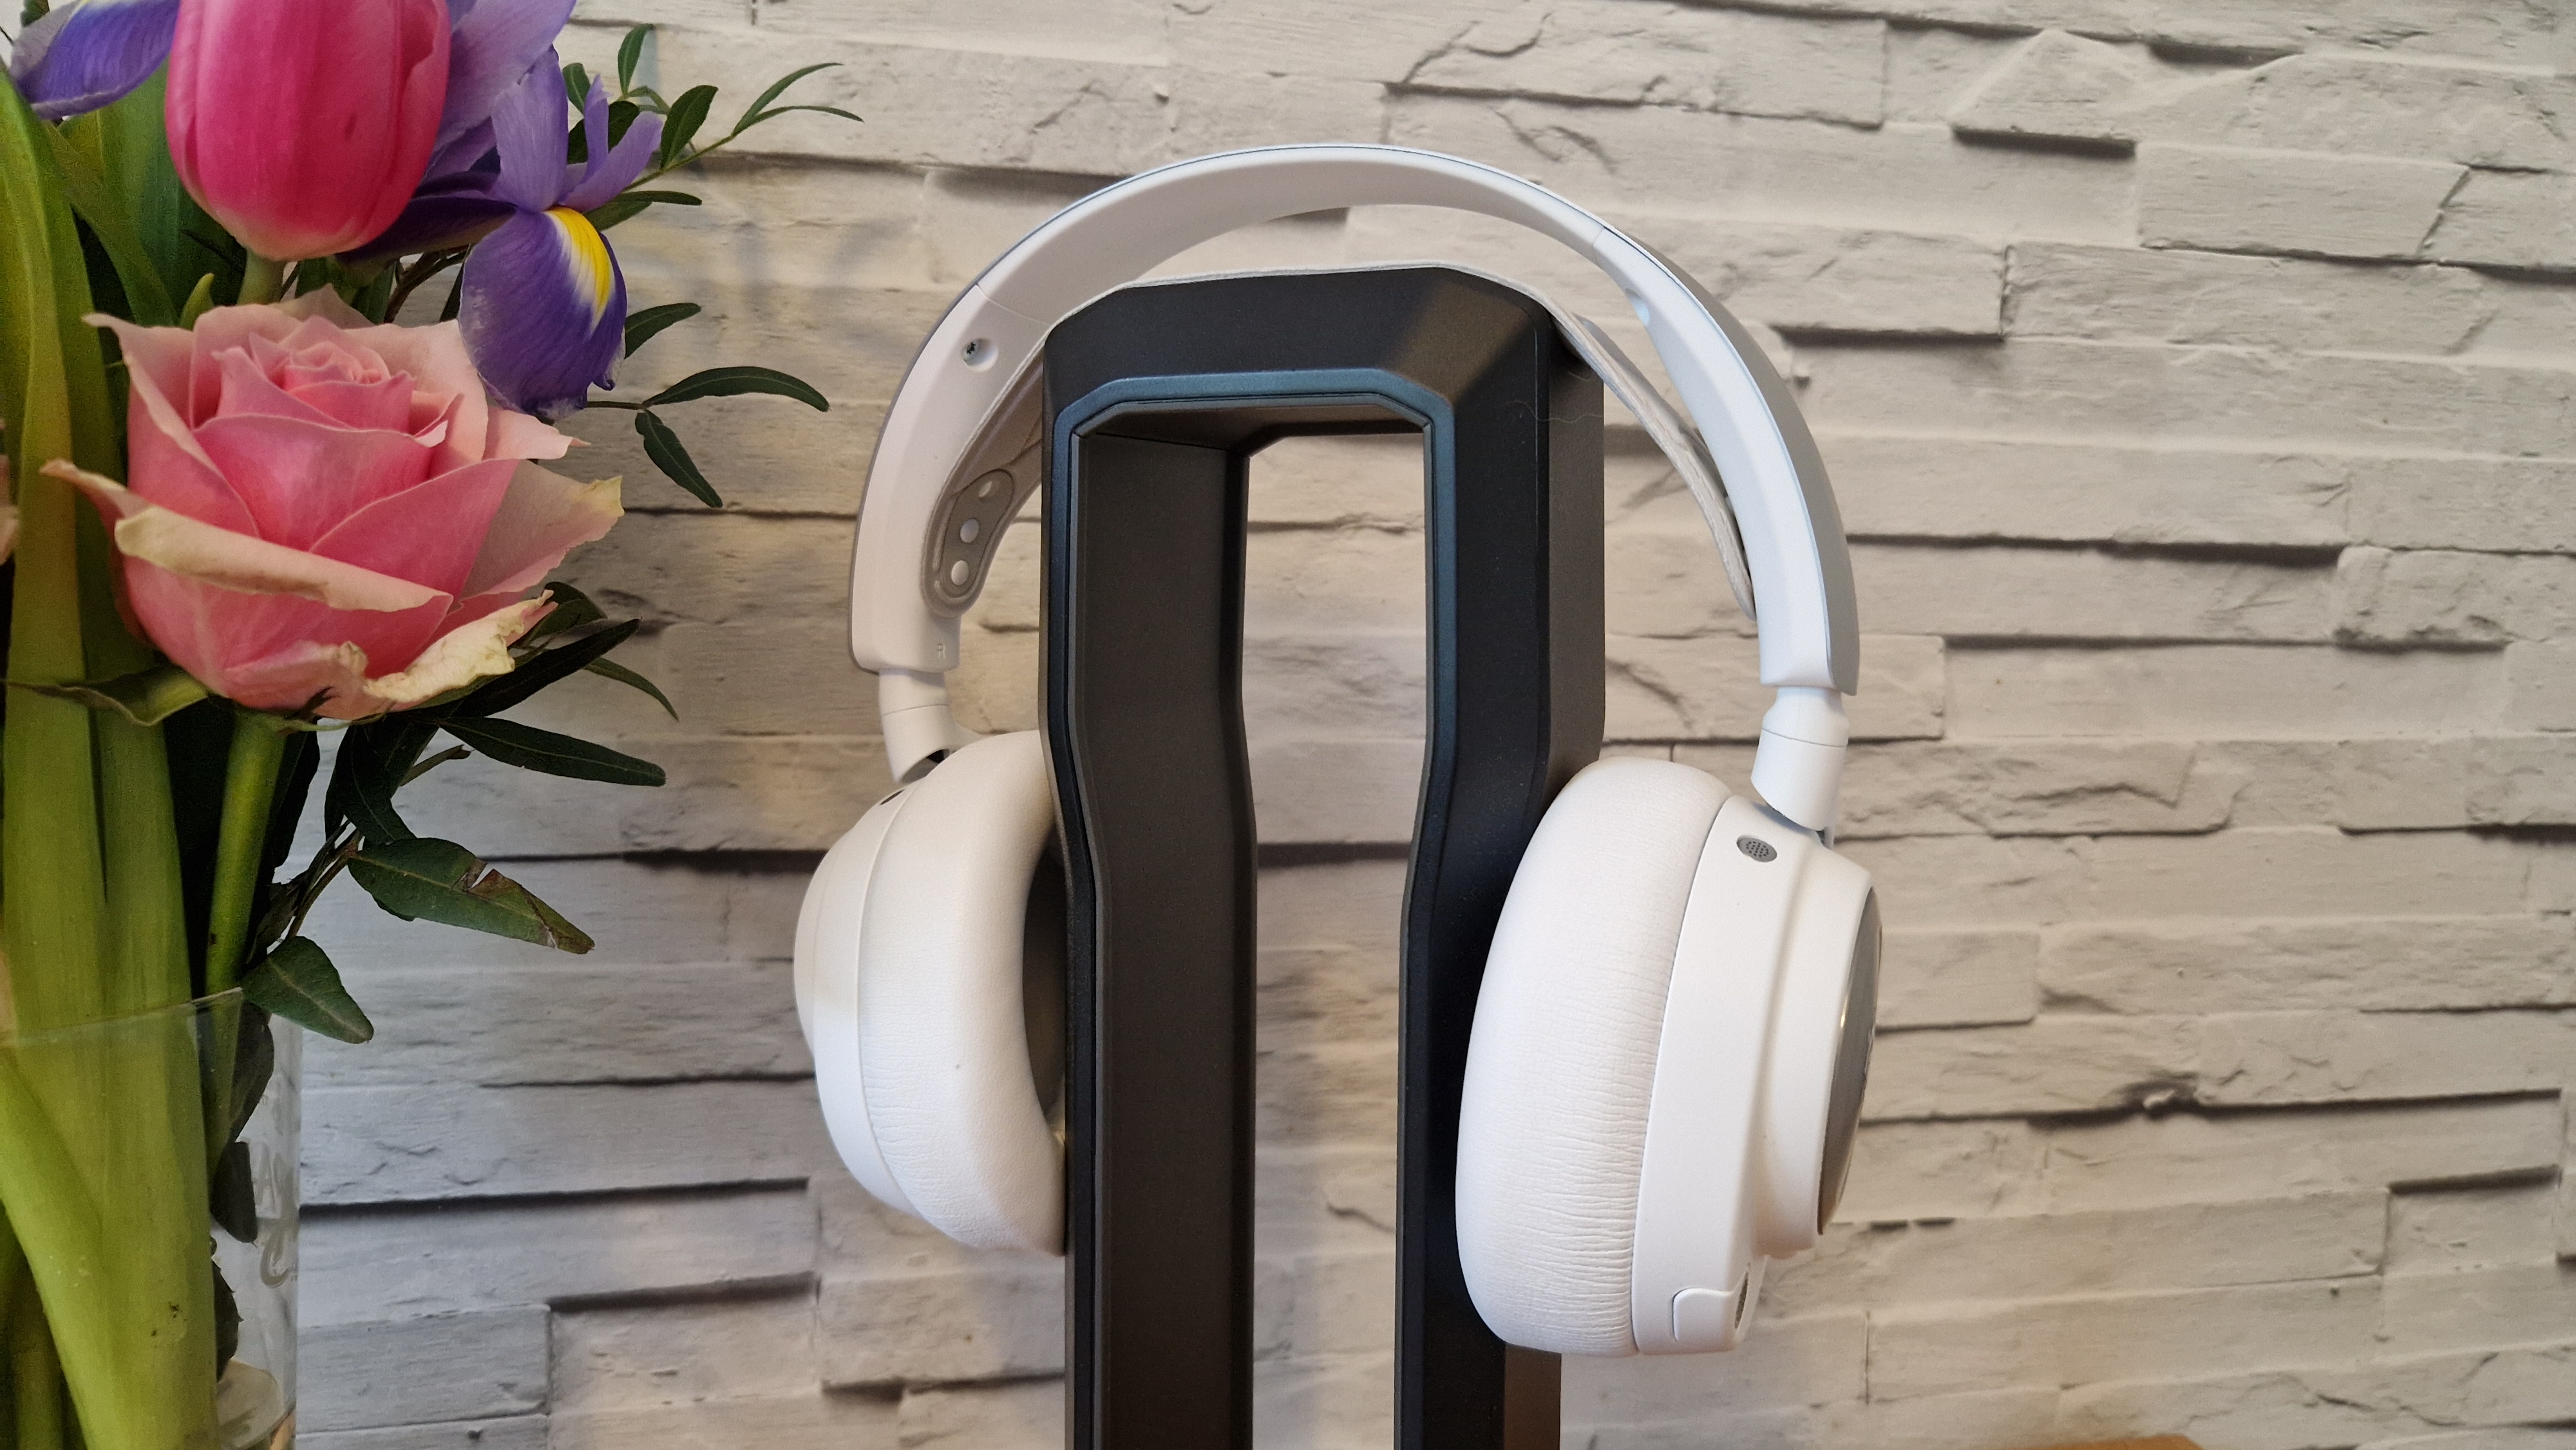  SteelSeries unveils a new white aesthetic for its Arctis Nova Pro line - and it's about as beautiful as gaming headsets can get